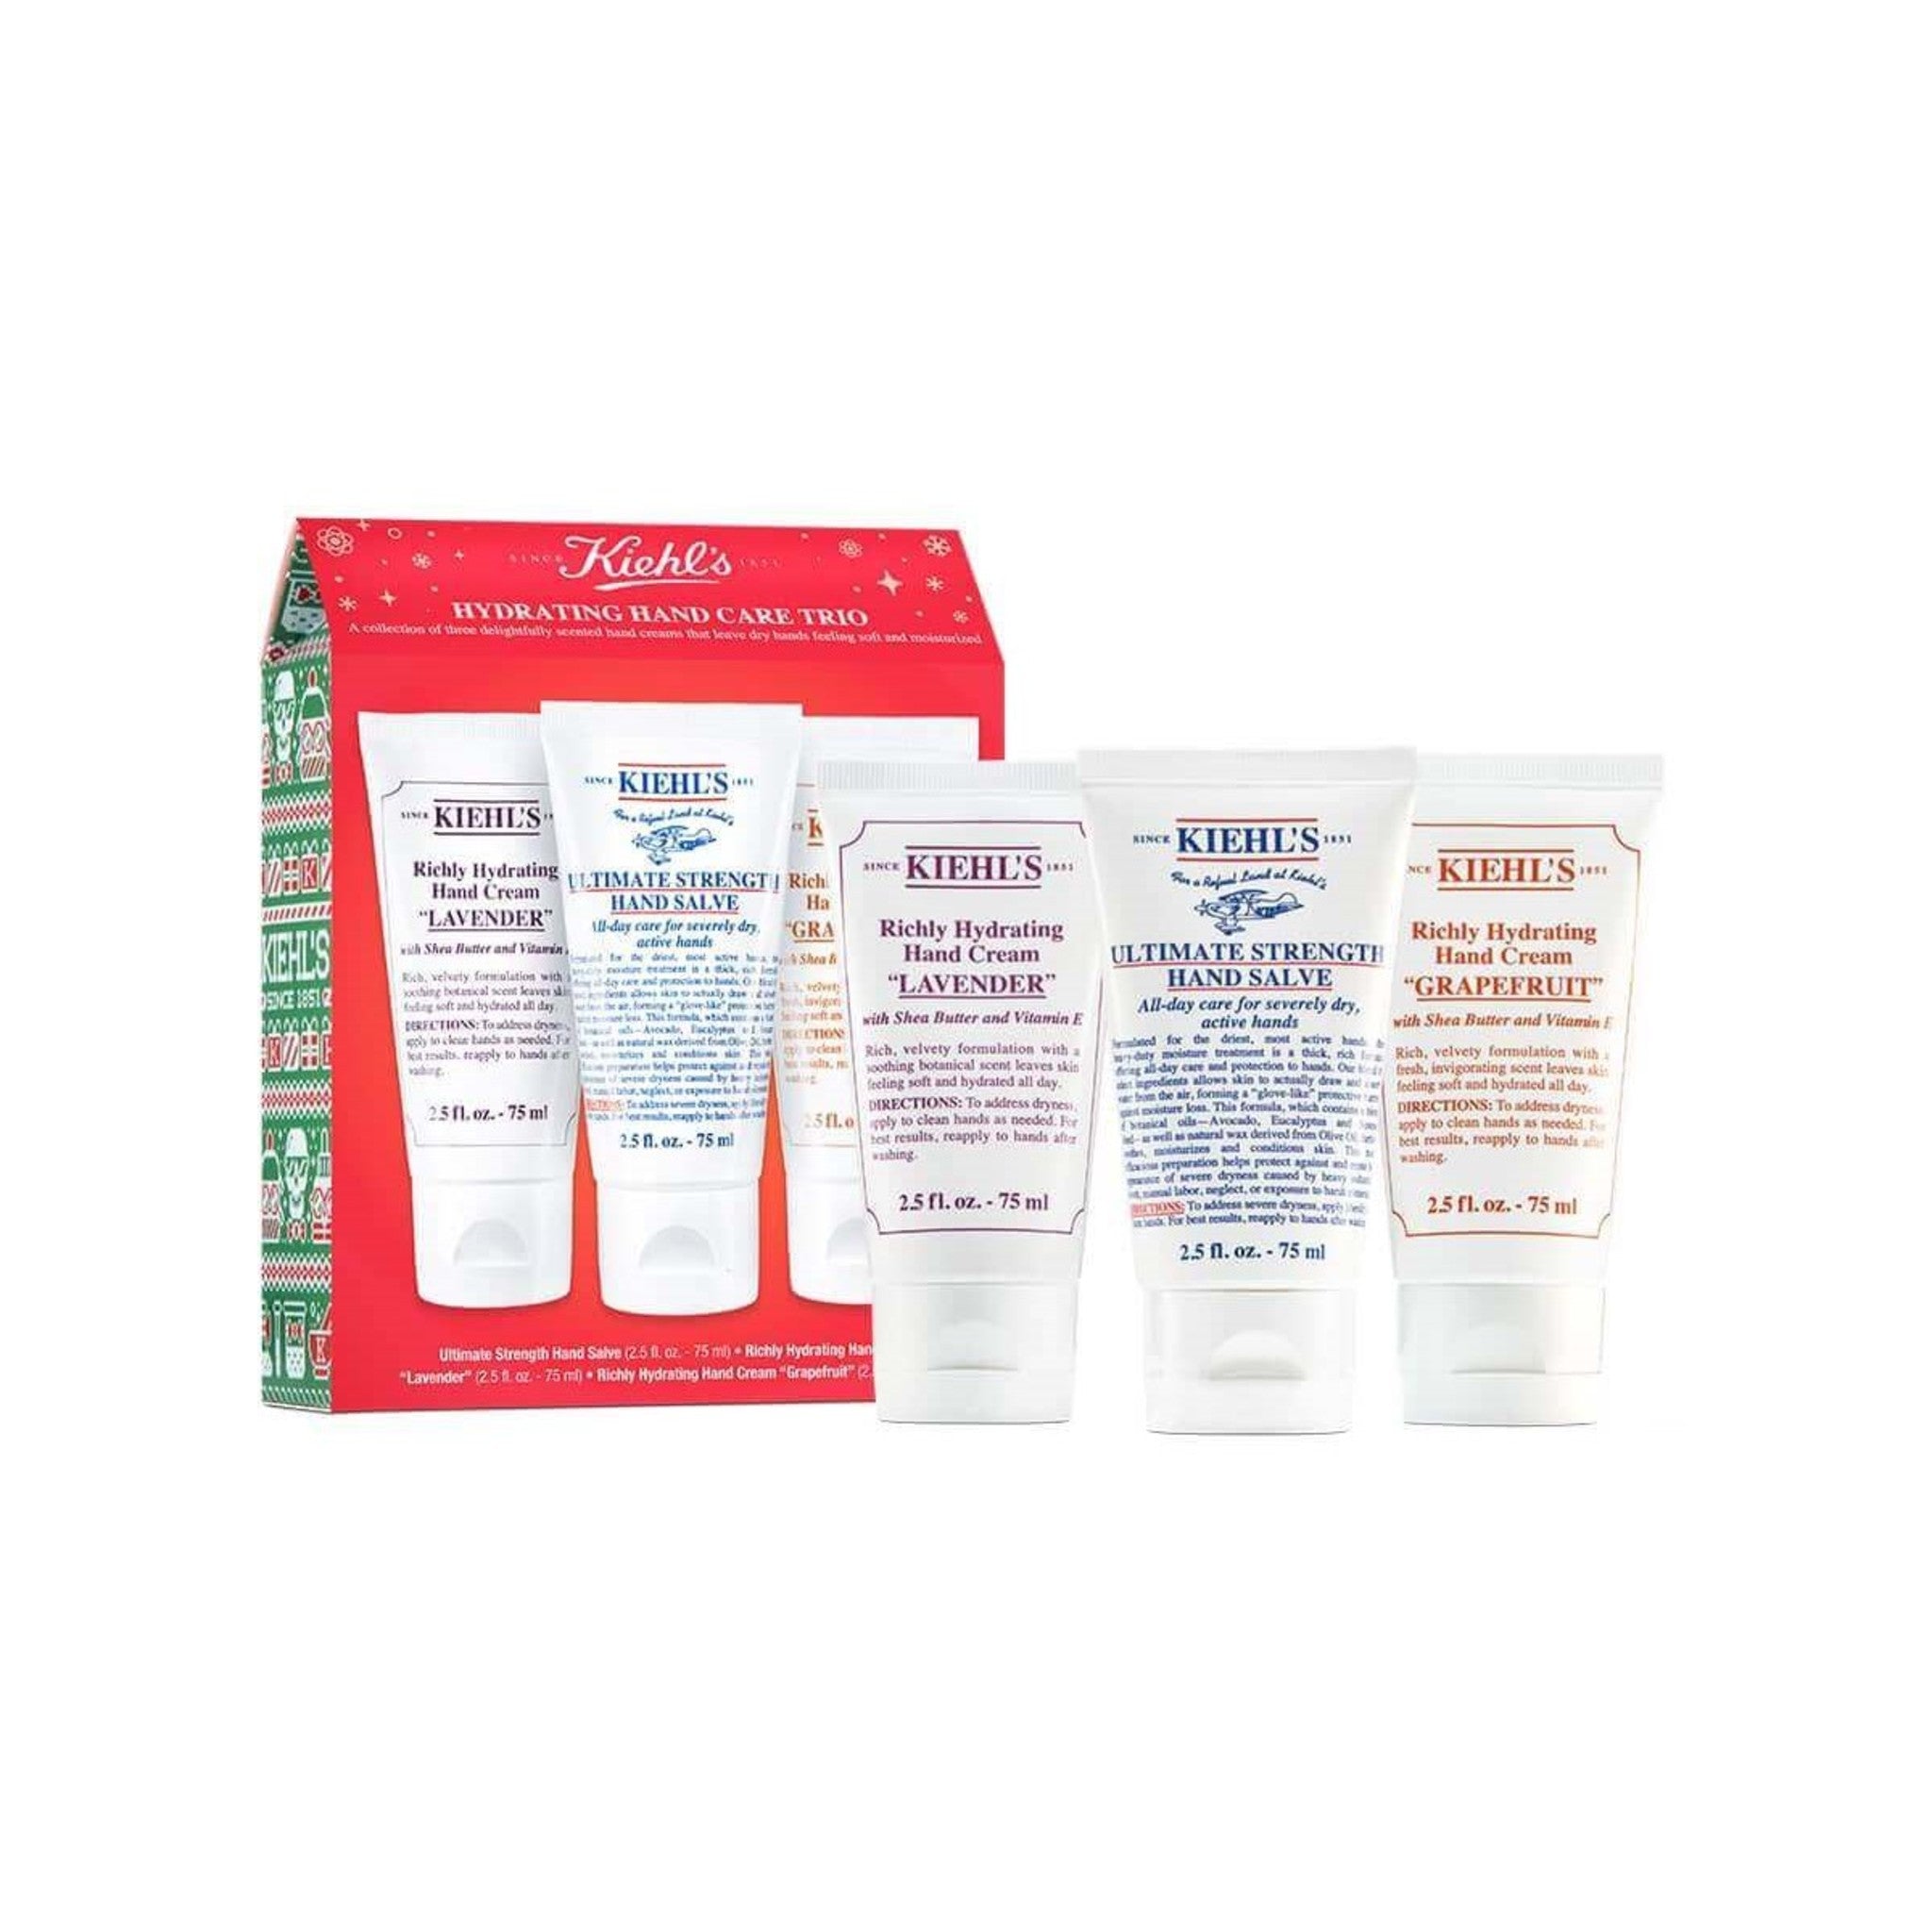 KIEHL'S SINCE 1851 HYDRATING HAND CARE TRIO